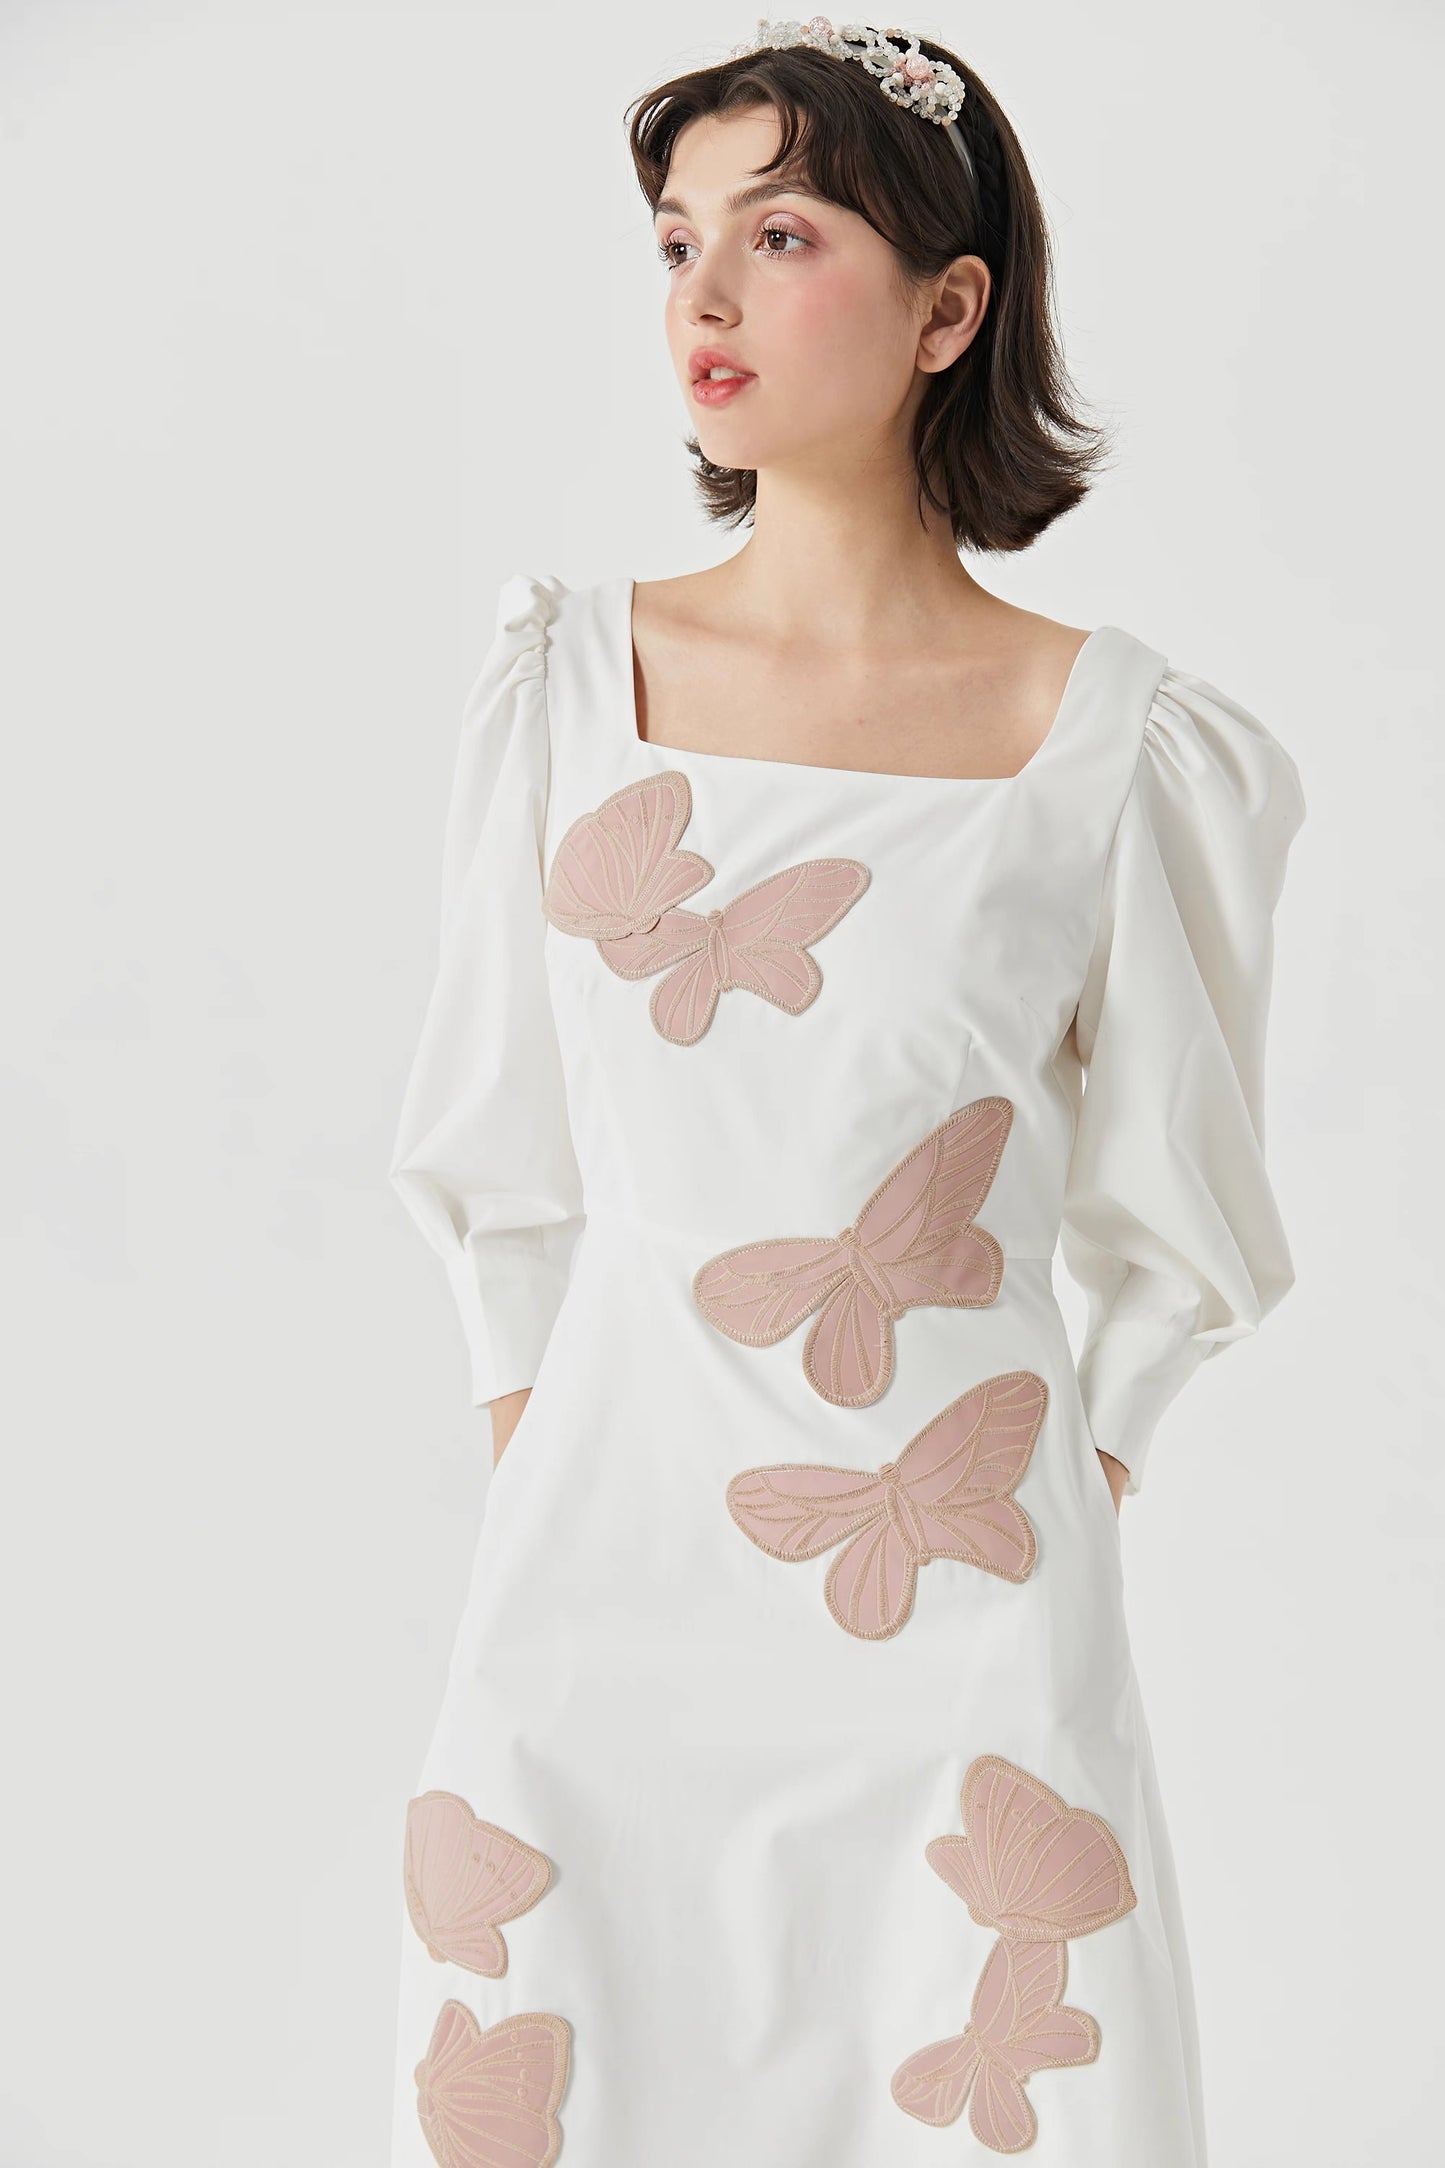 pink butterfly embroidered square collar temperament dress